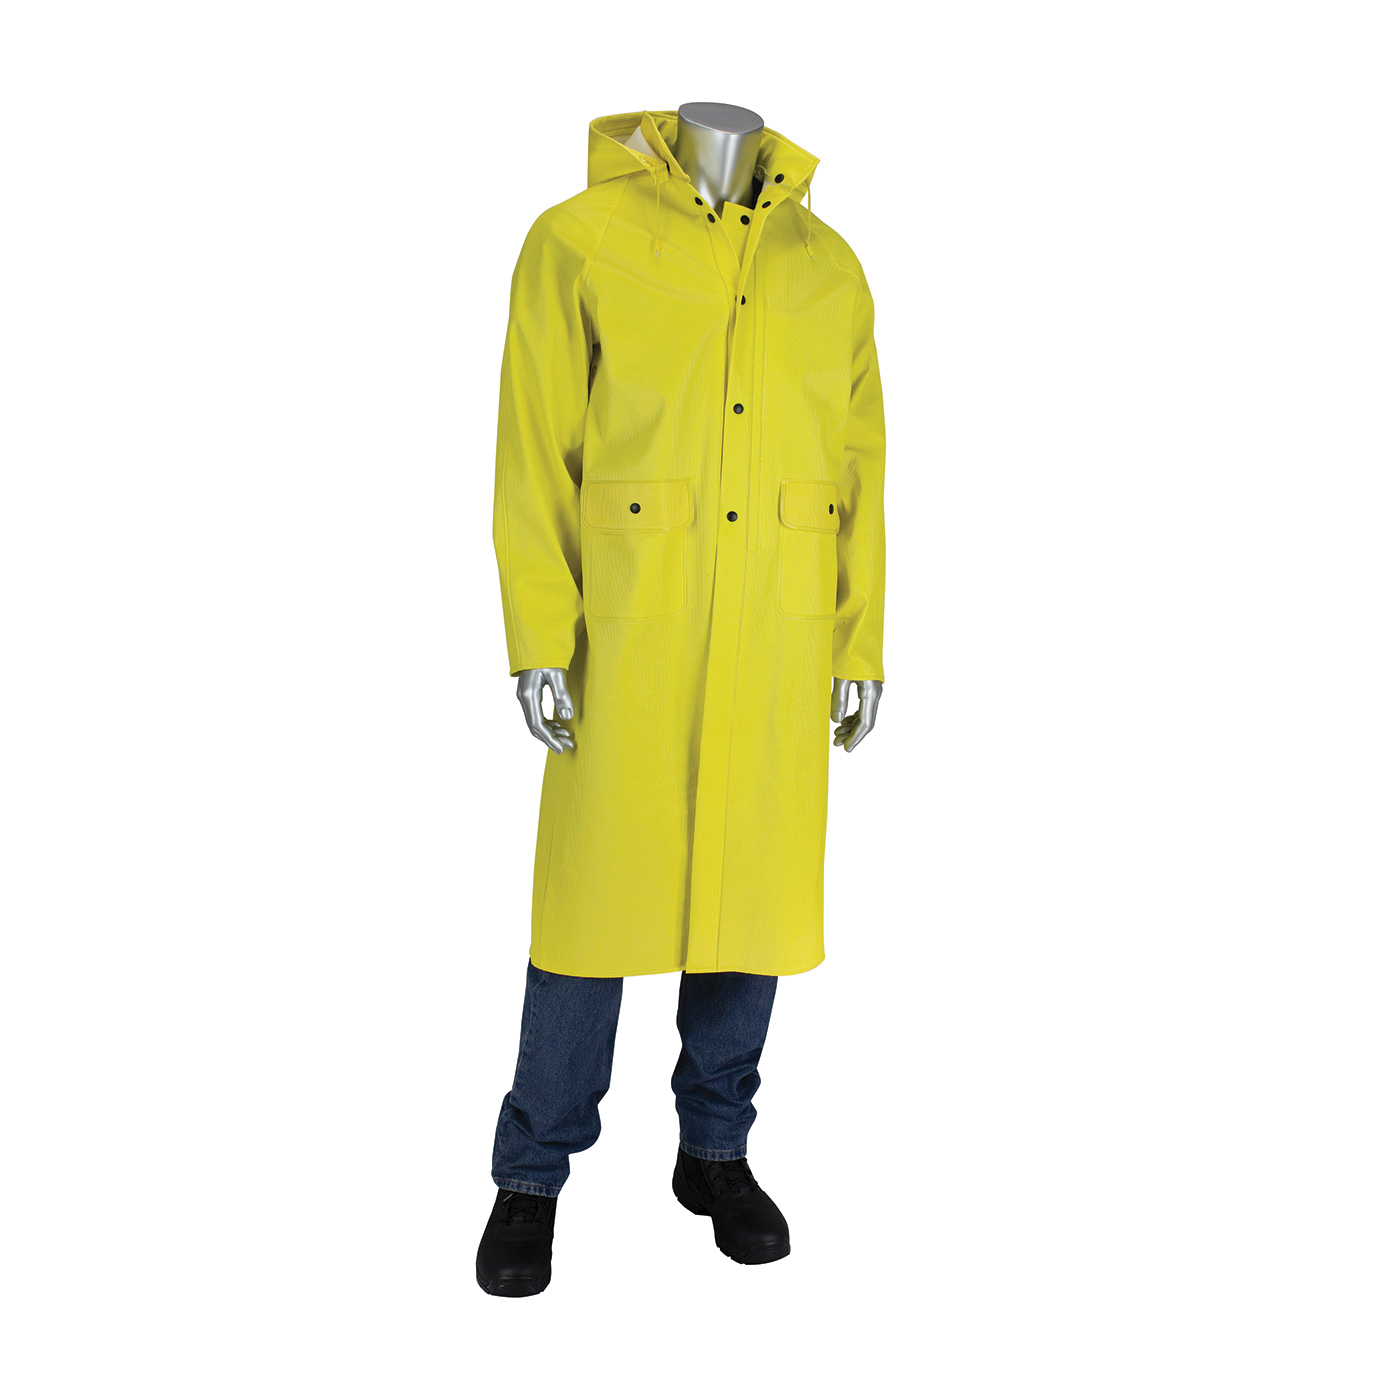 PIP® FALCON™ Flex™ 201-650C/2X 2-Piece Ribbed Rain Jacket With Hood, 2XL, Yellow, PVC/Non-Woven Polyester, Resists: Rips, Tear and Water